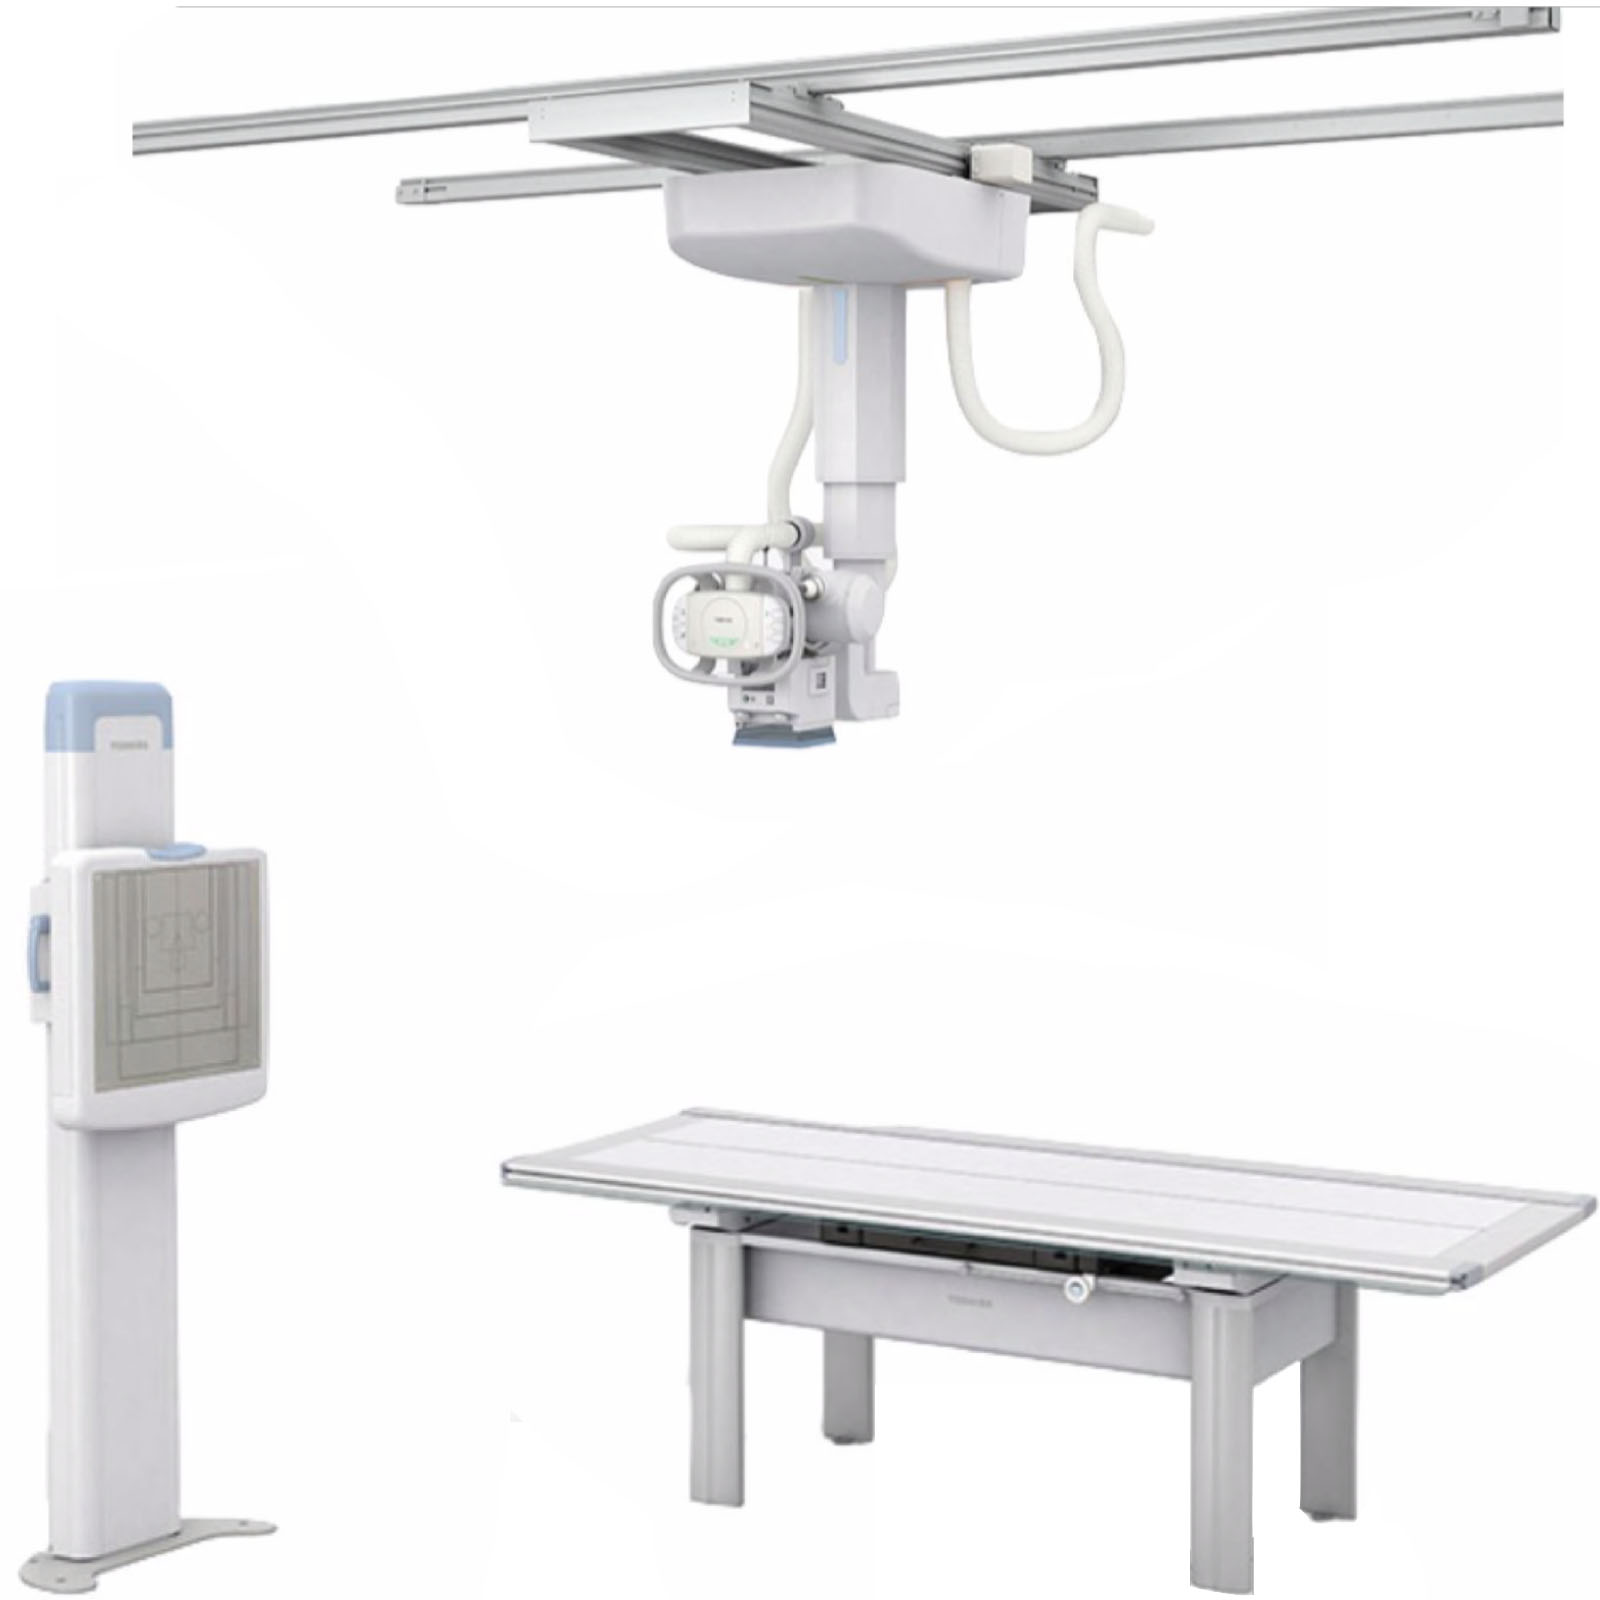 Angiography System Market